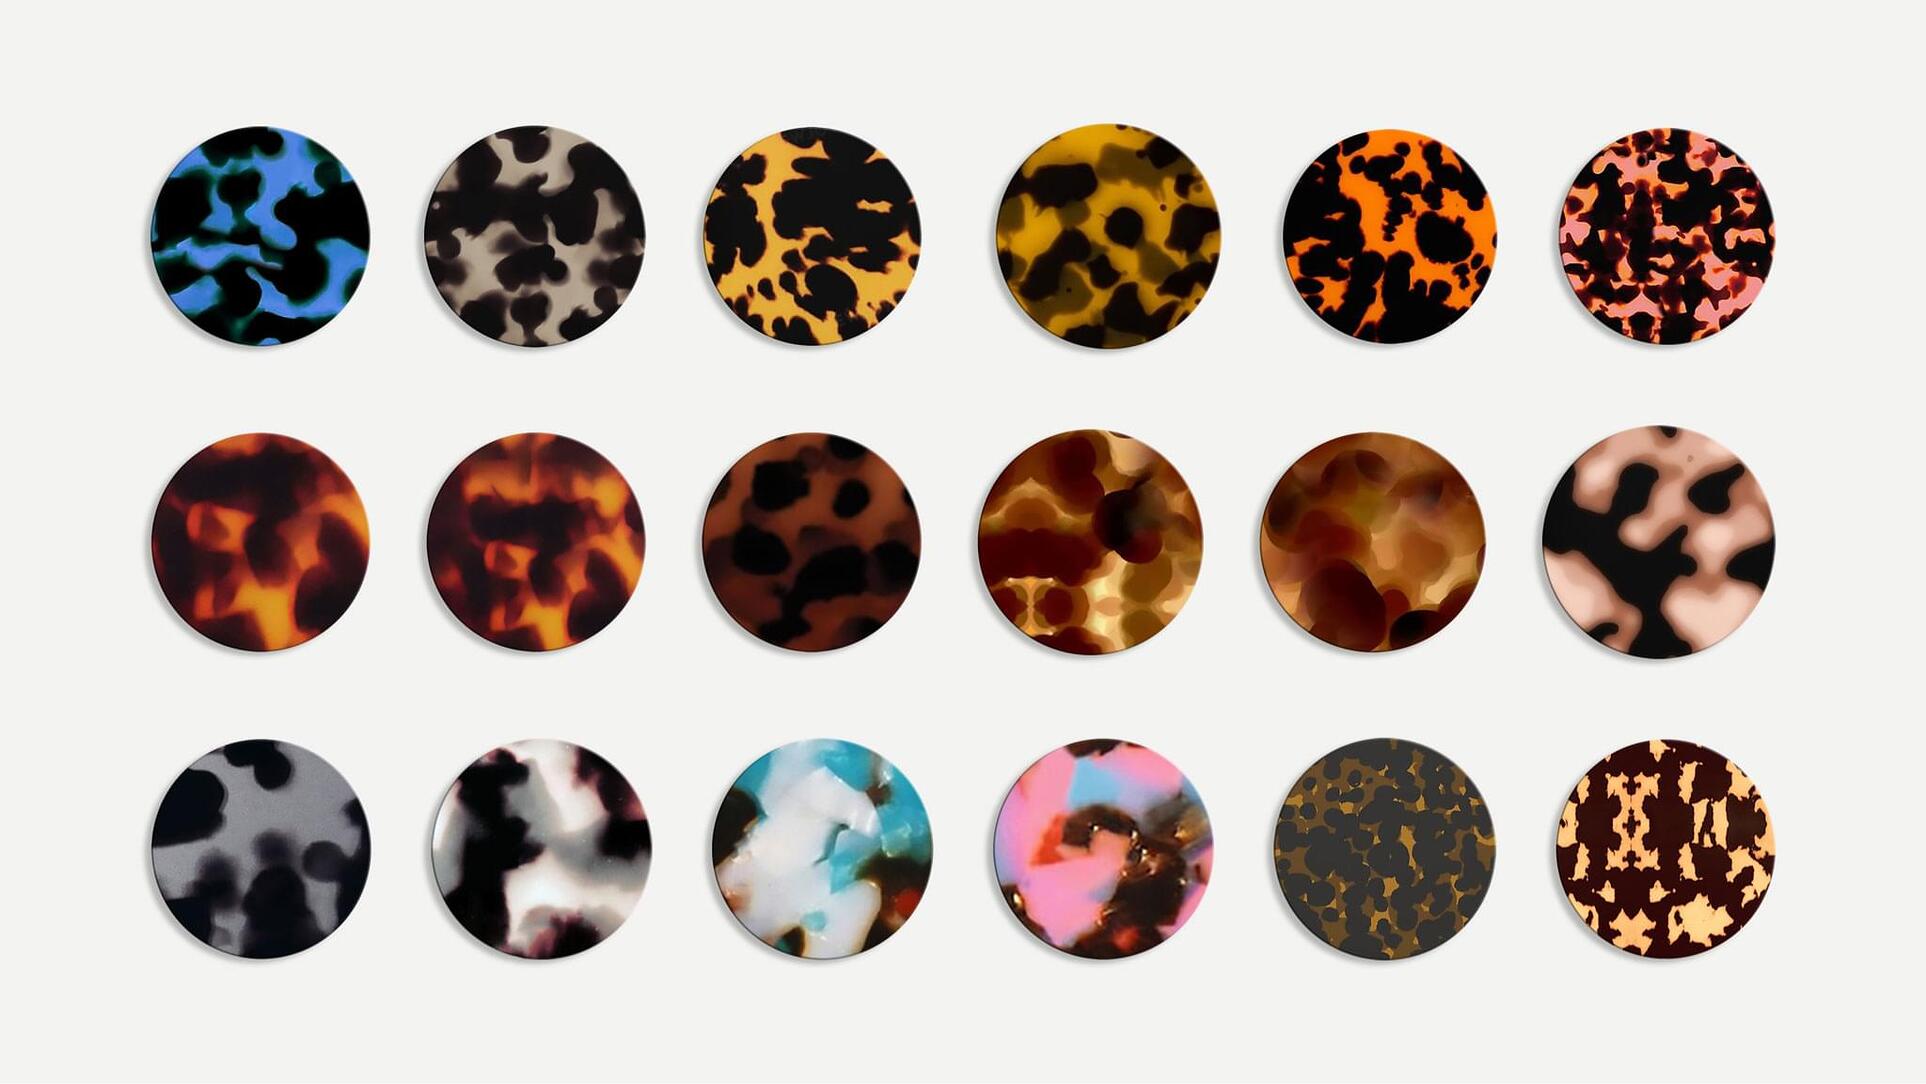 A colorful palette of 18 tortoise shell patterns, ranging from brown, blue, red and white.